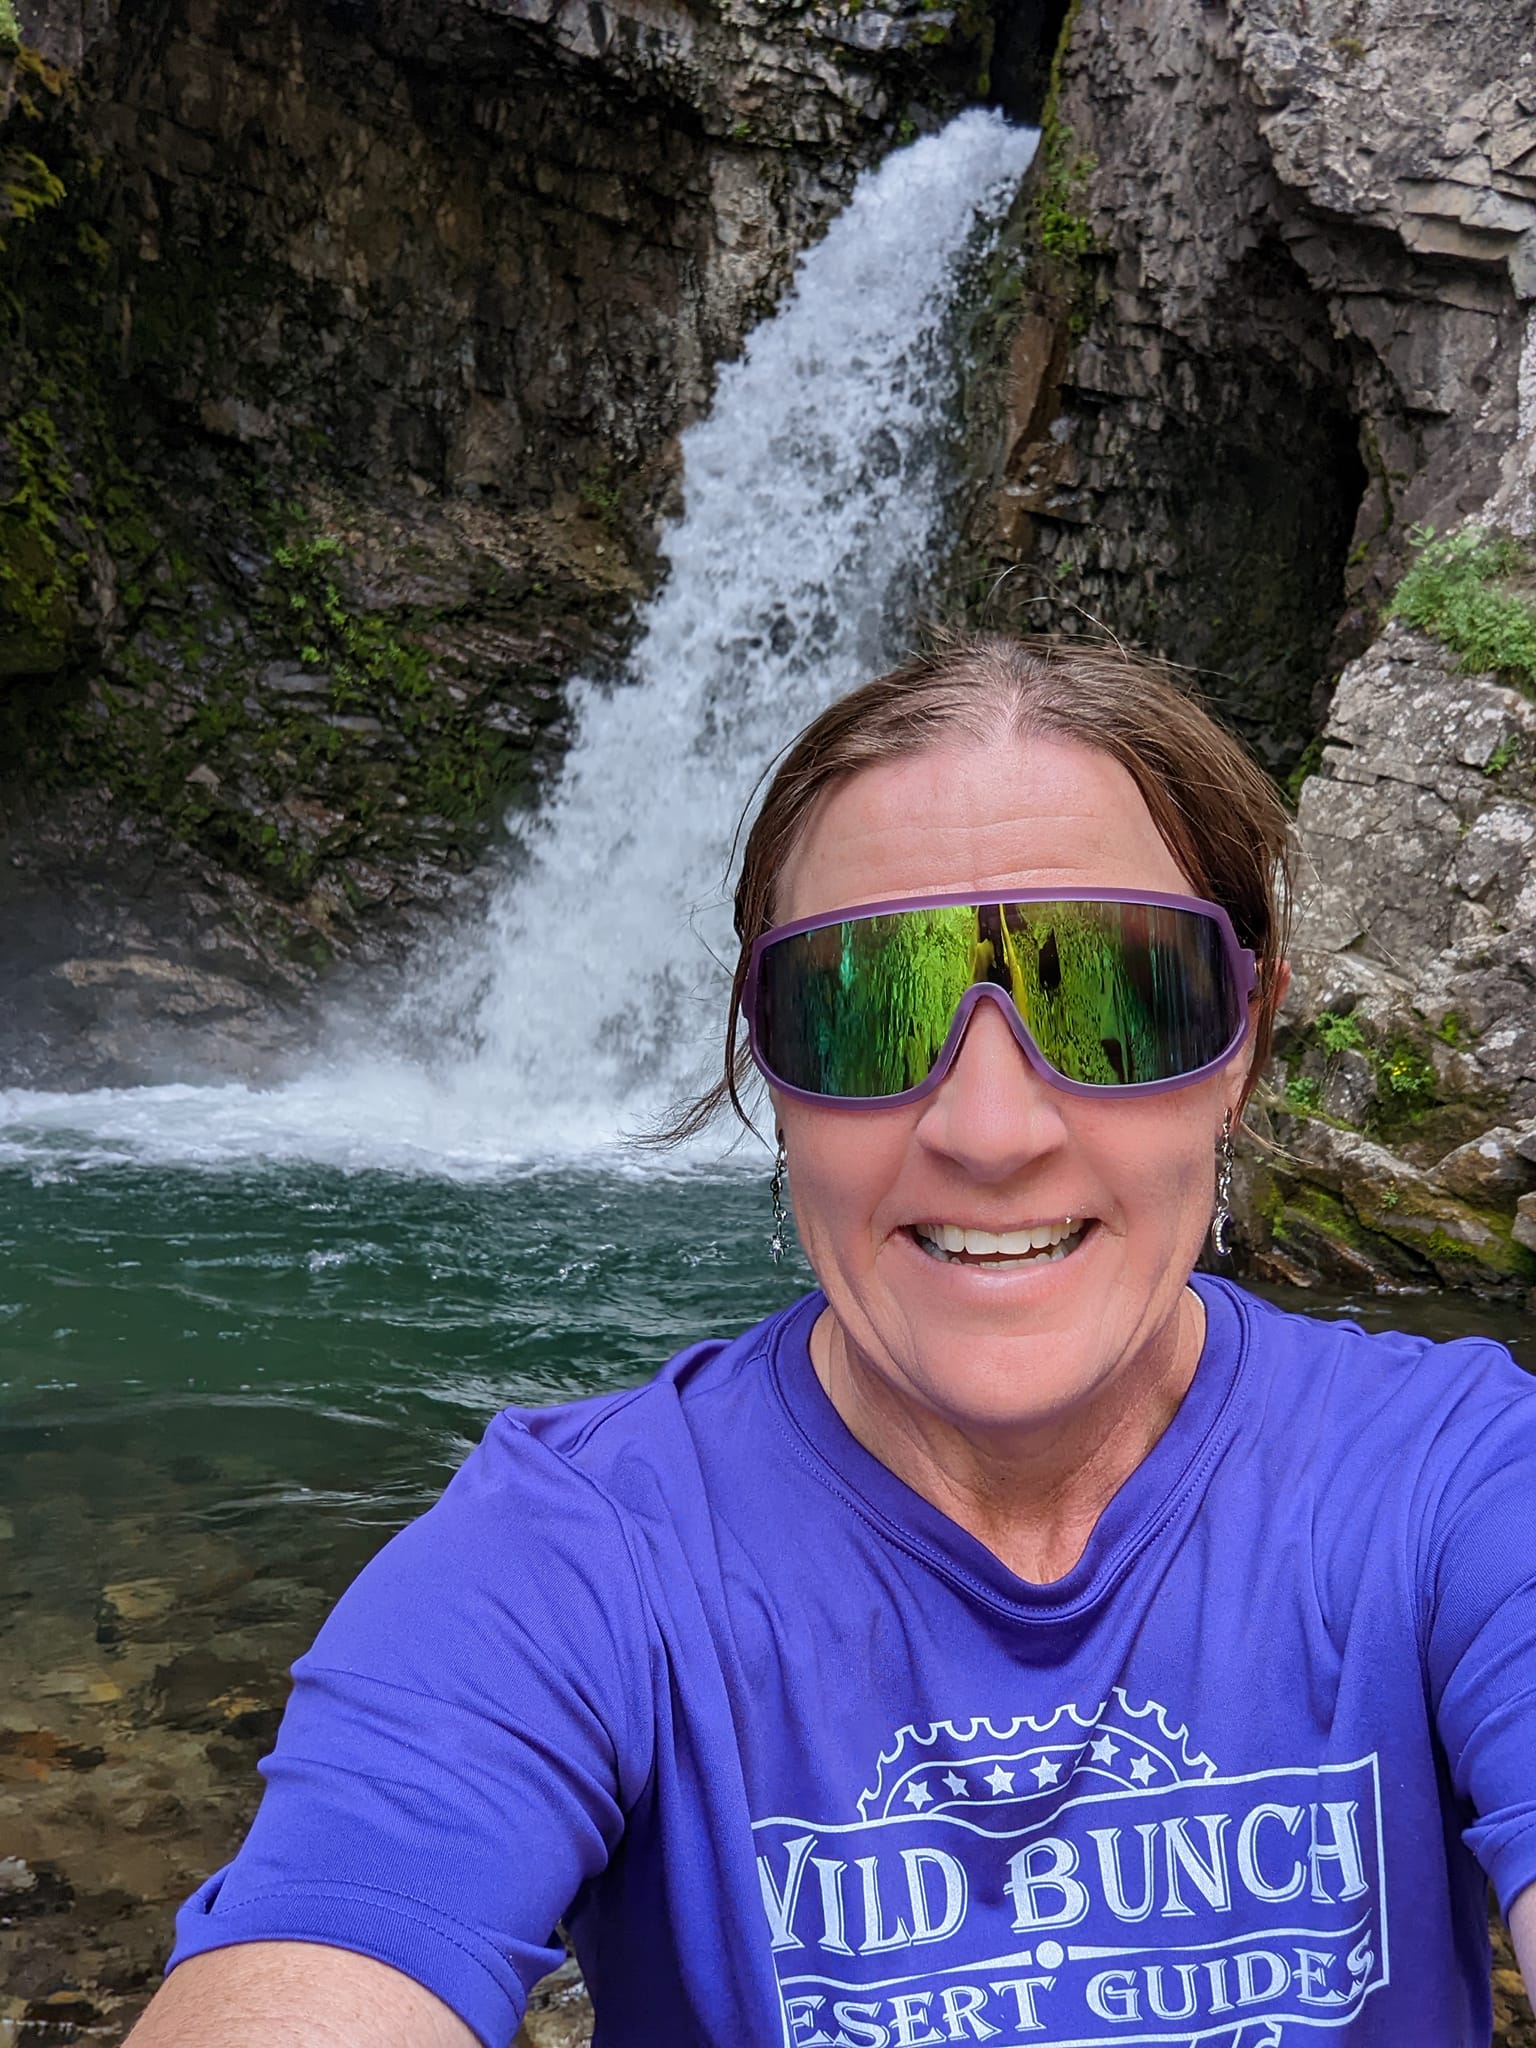 Laurel stops to admire the beauty of a cascading waterfall during one of the Wild Bunch's Colorado summer hiking tours.